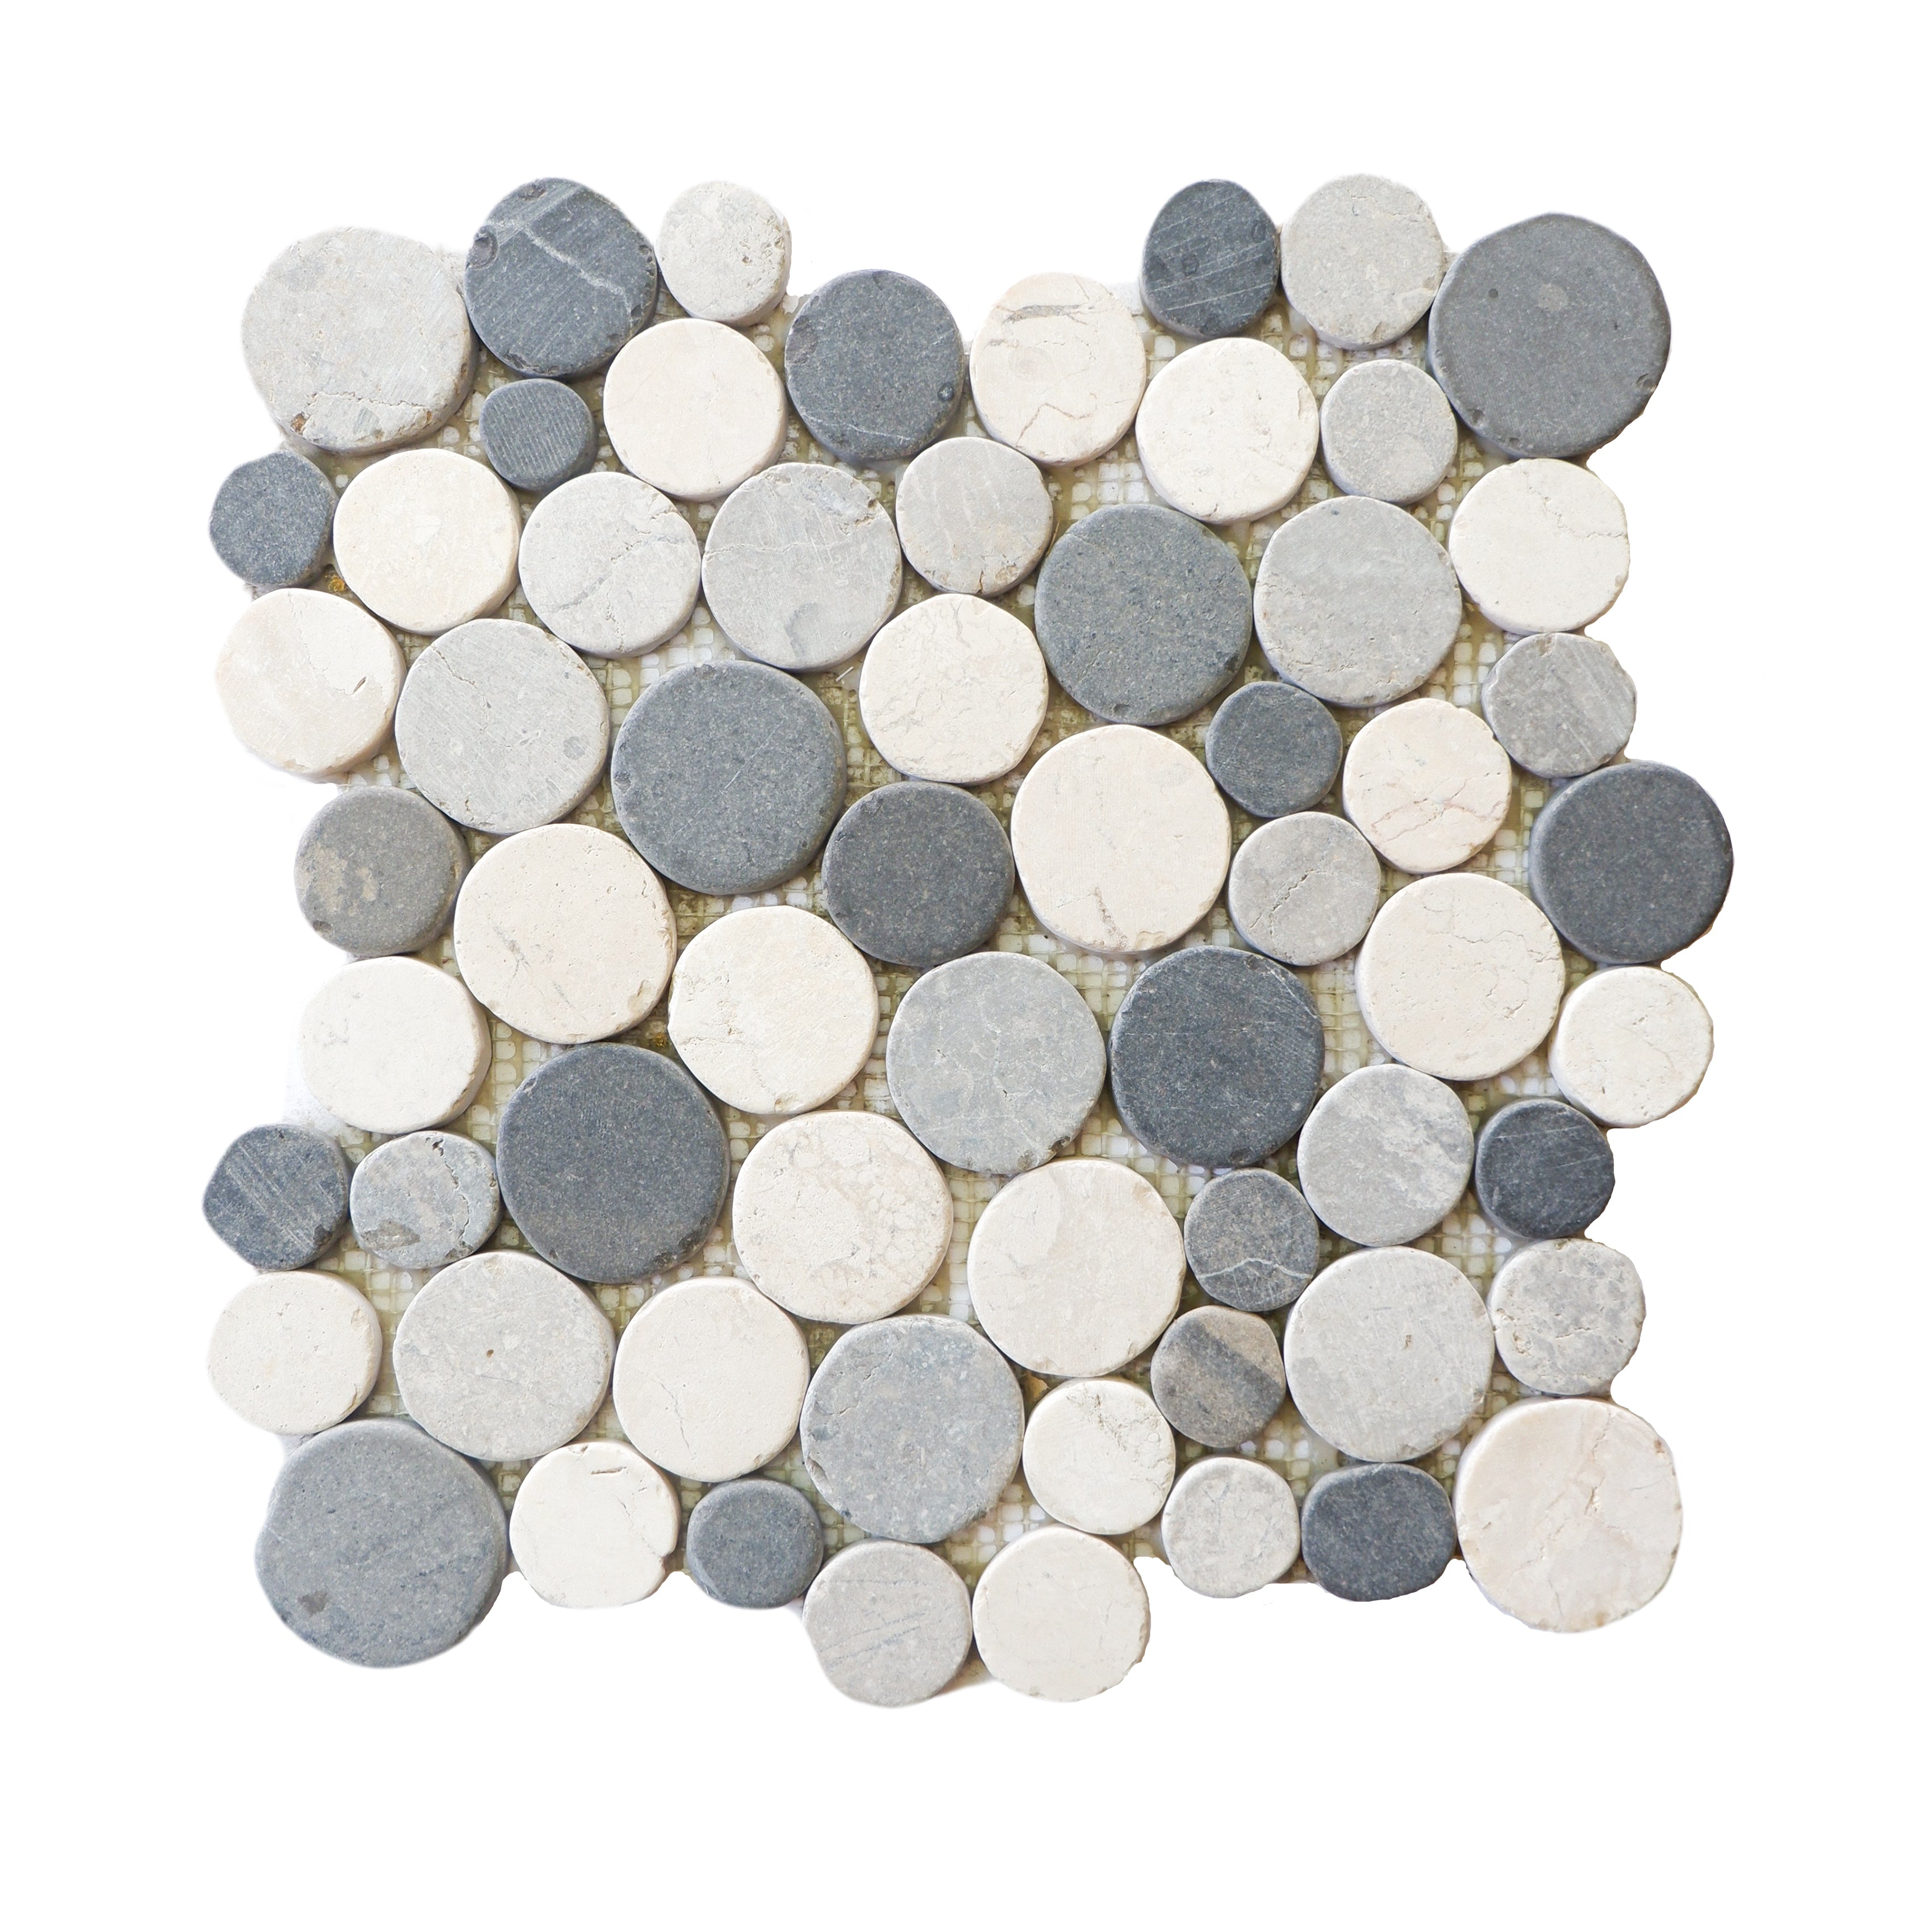 Bali mix pebble tile sample without grout